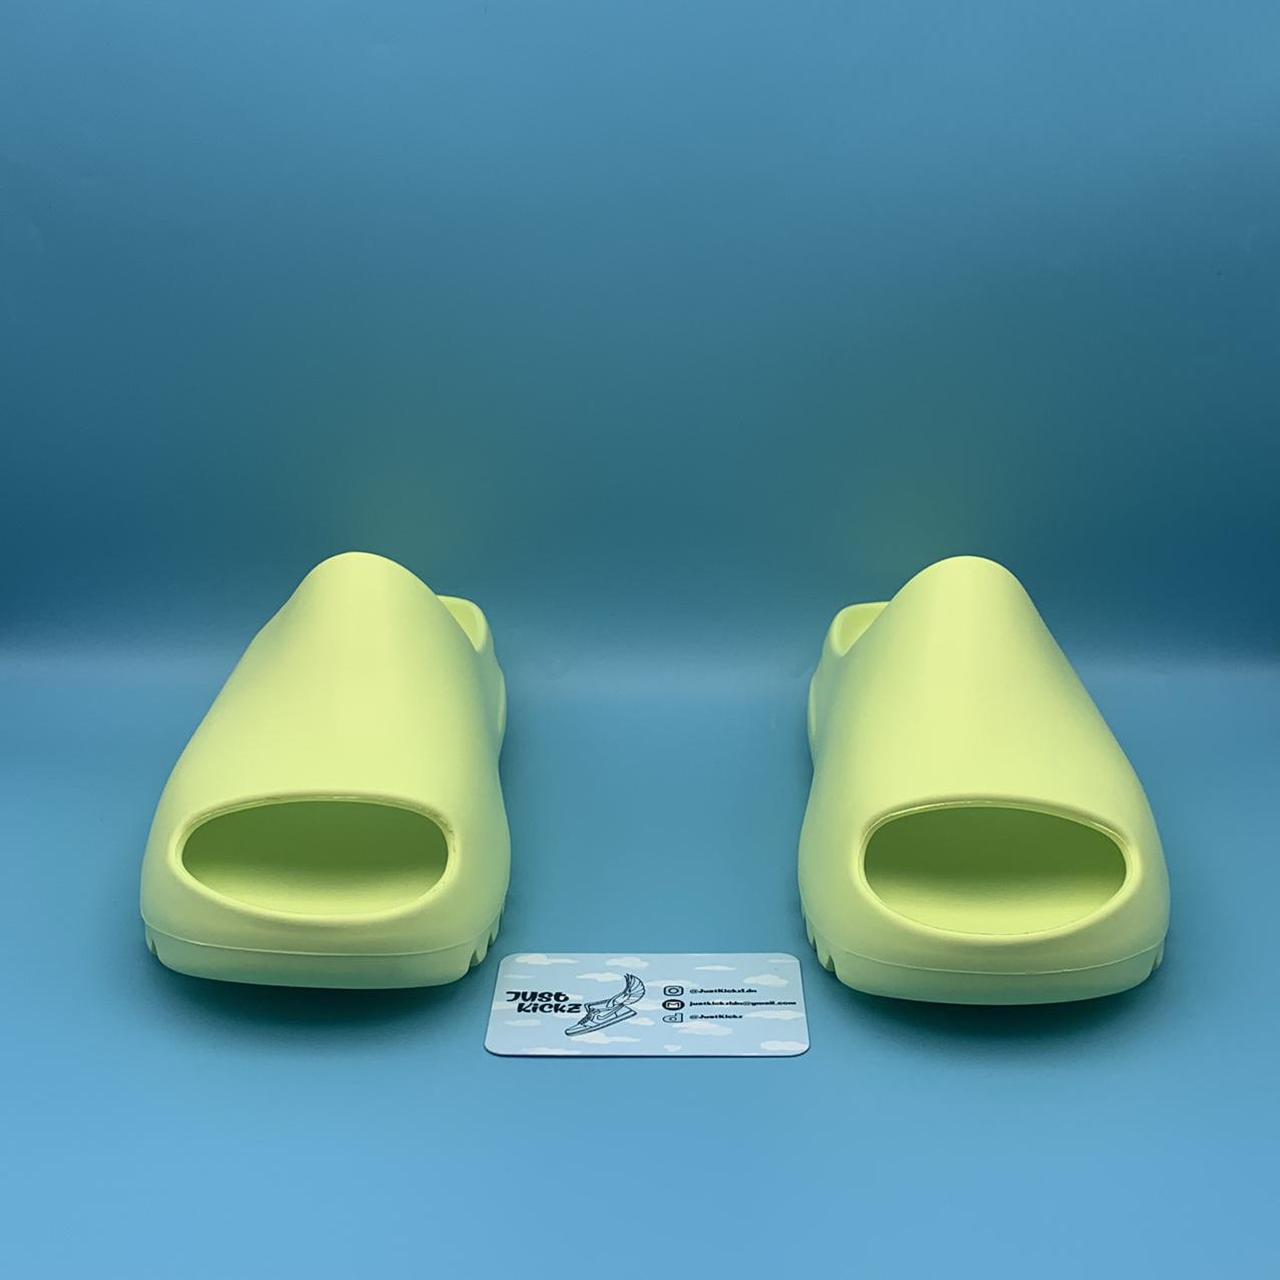 Product Image 3 - Yeezy Slide ‘Glow Green’

Condition: Brand